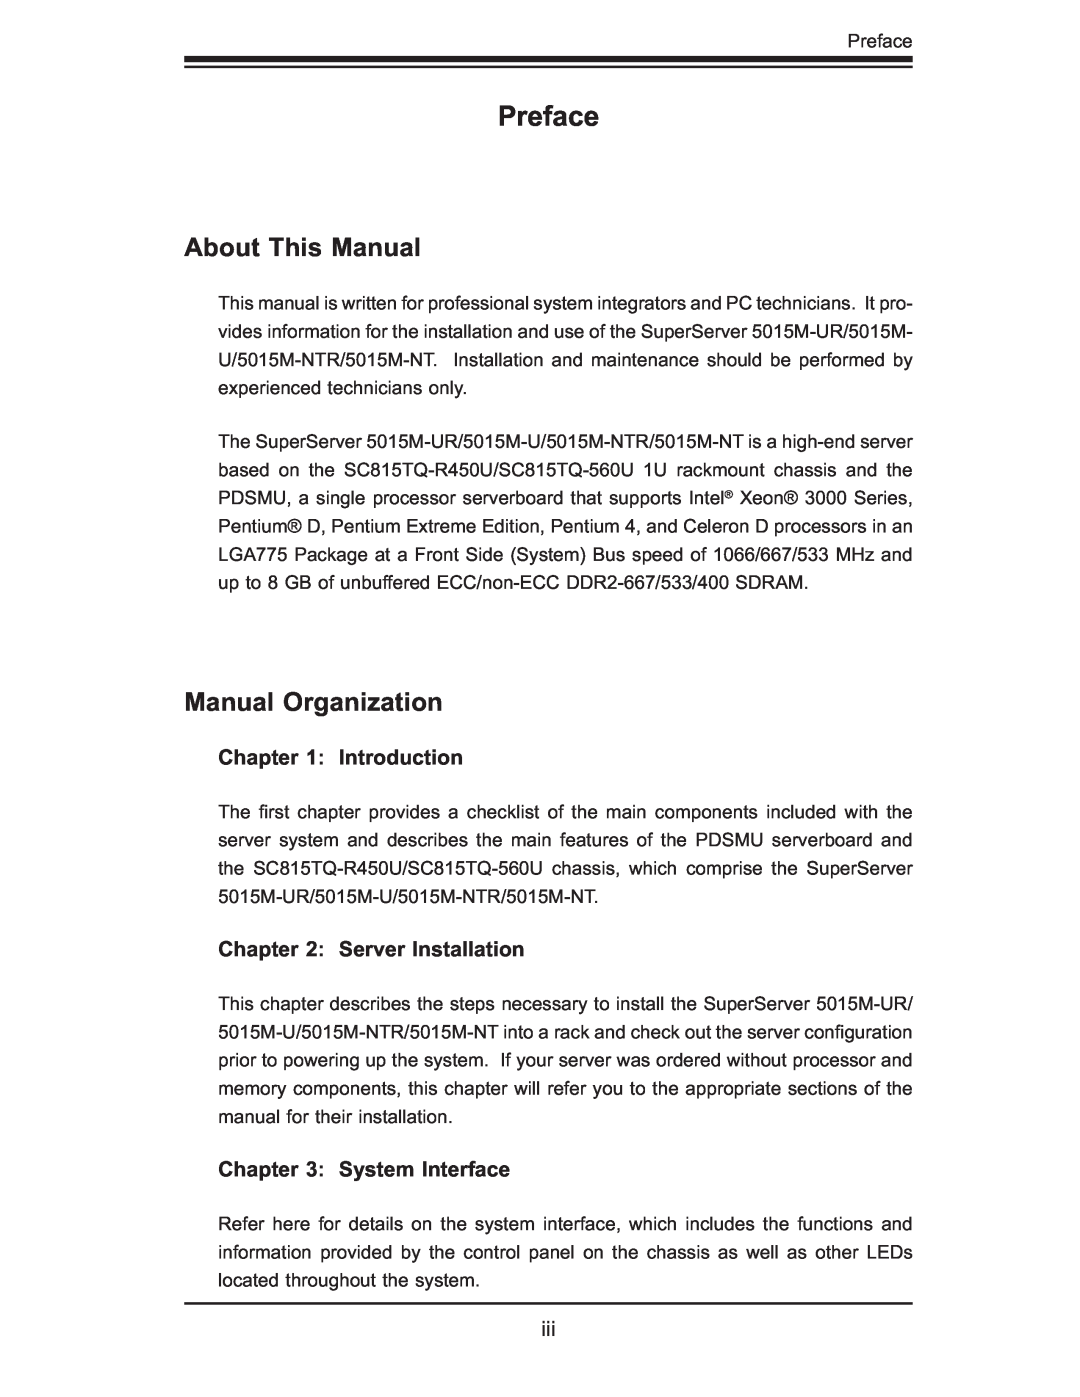 SUPER MICRO Computer 5015M-NTR, 5015M-U Preface, About This Manual, Manual Organization, Introduction, Server Installation 